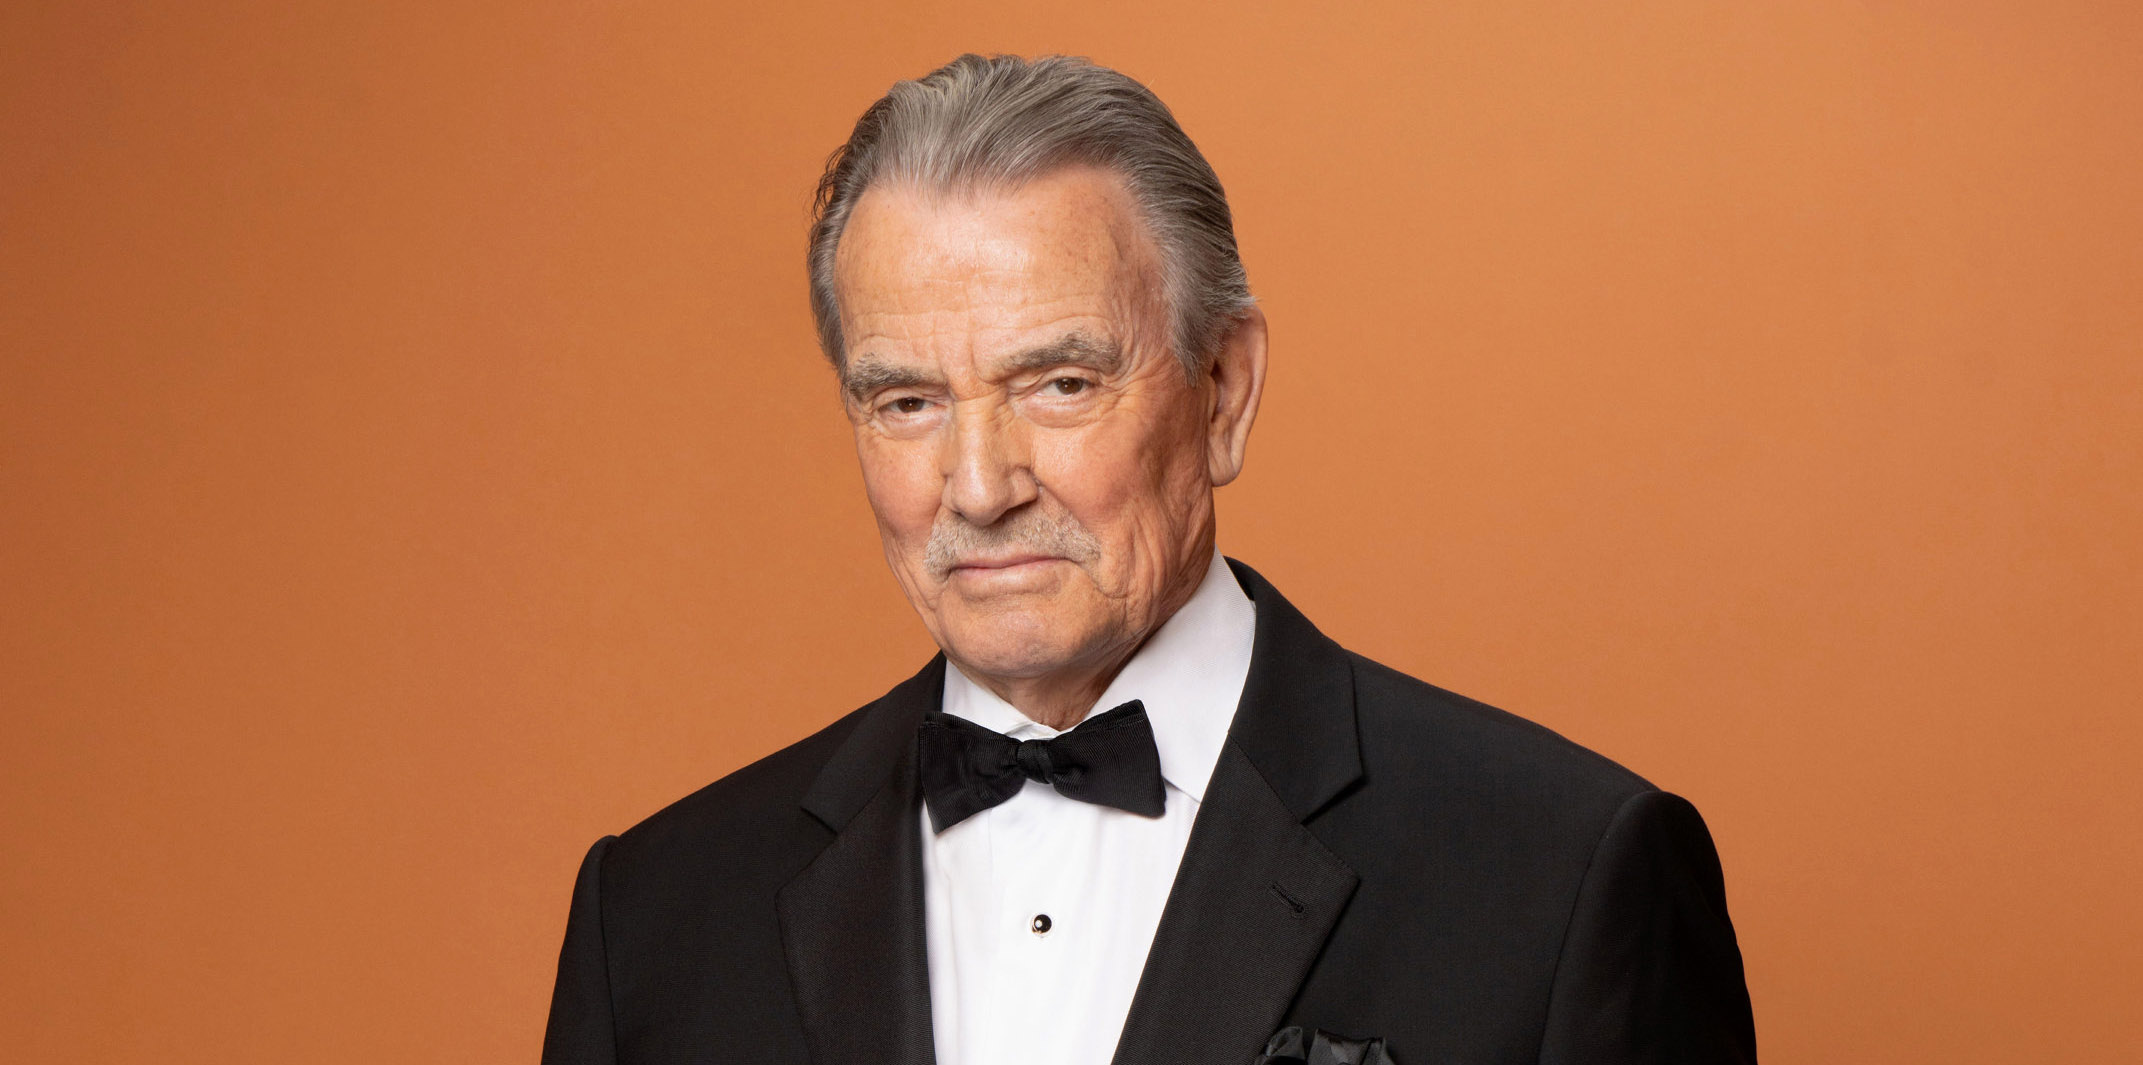 YOUNG AND RESTLESS's Eric Braeden On 44 Years As Victor: "I Feel Very  Lucky" - Soap Opera Digest